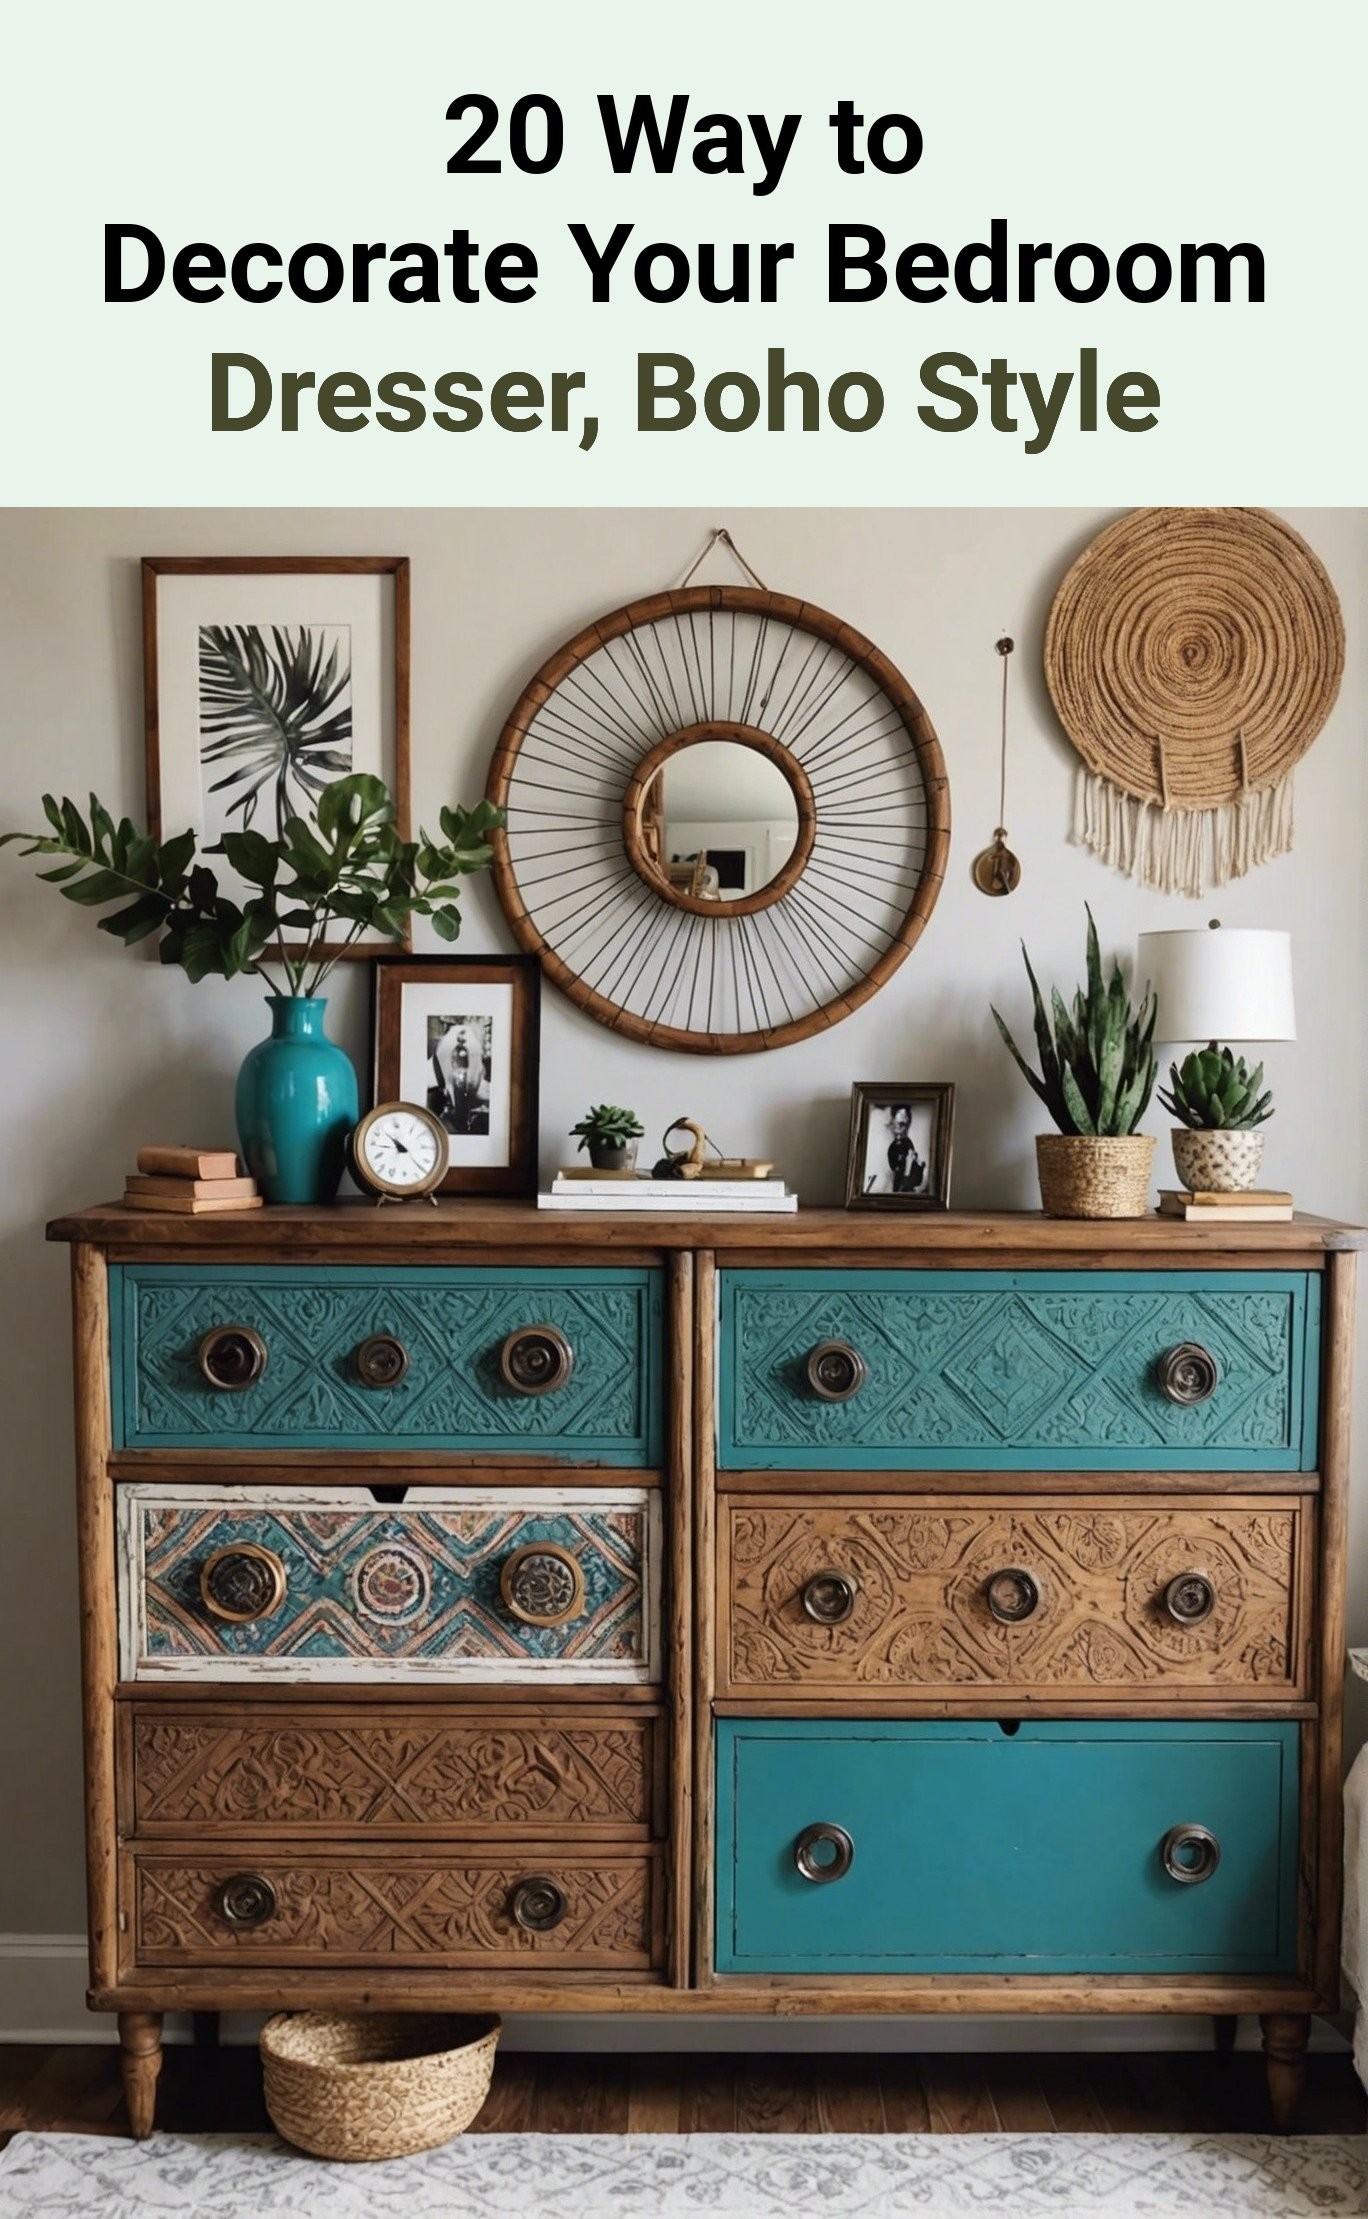 20 Way to Decorate Your Bedroom Dresser, Boho Style